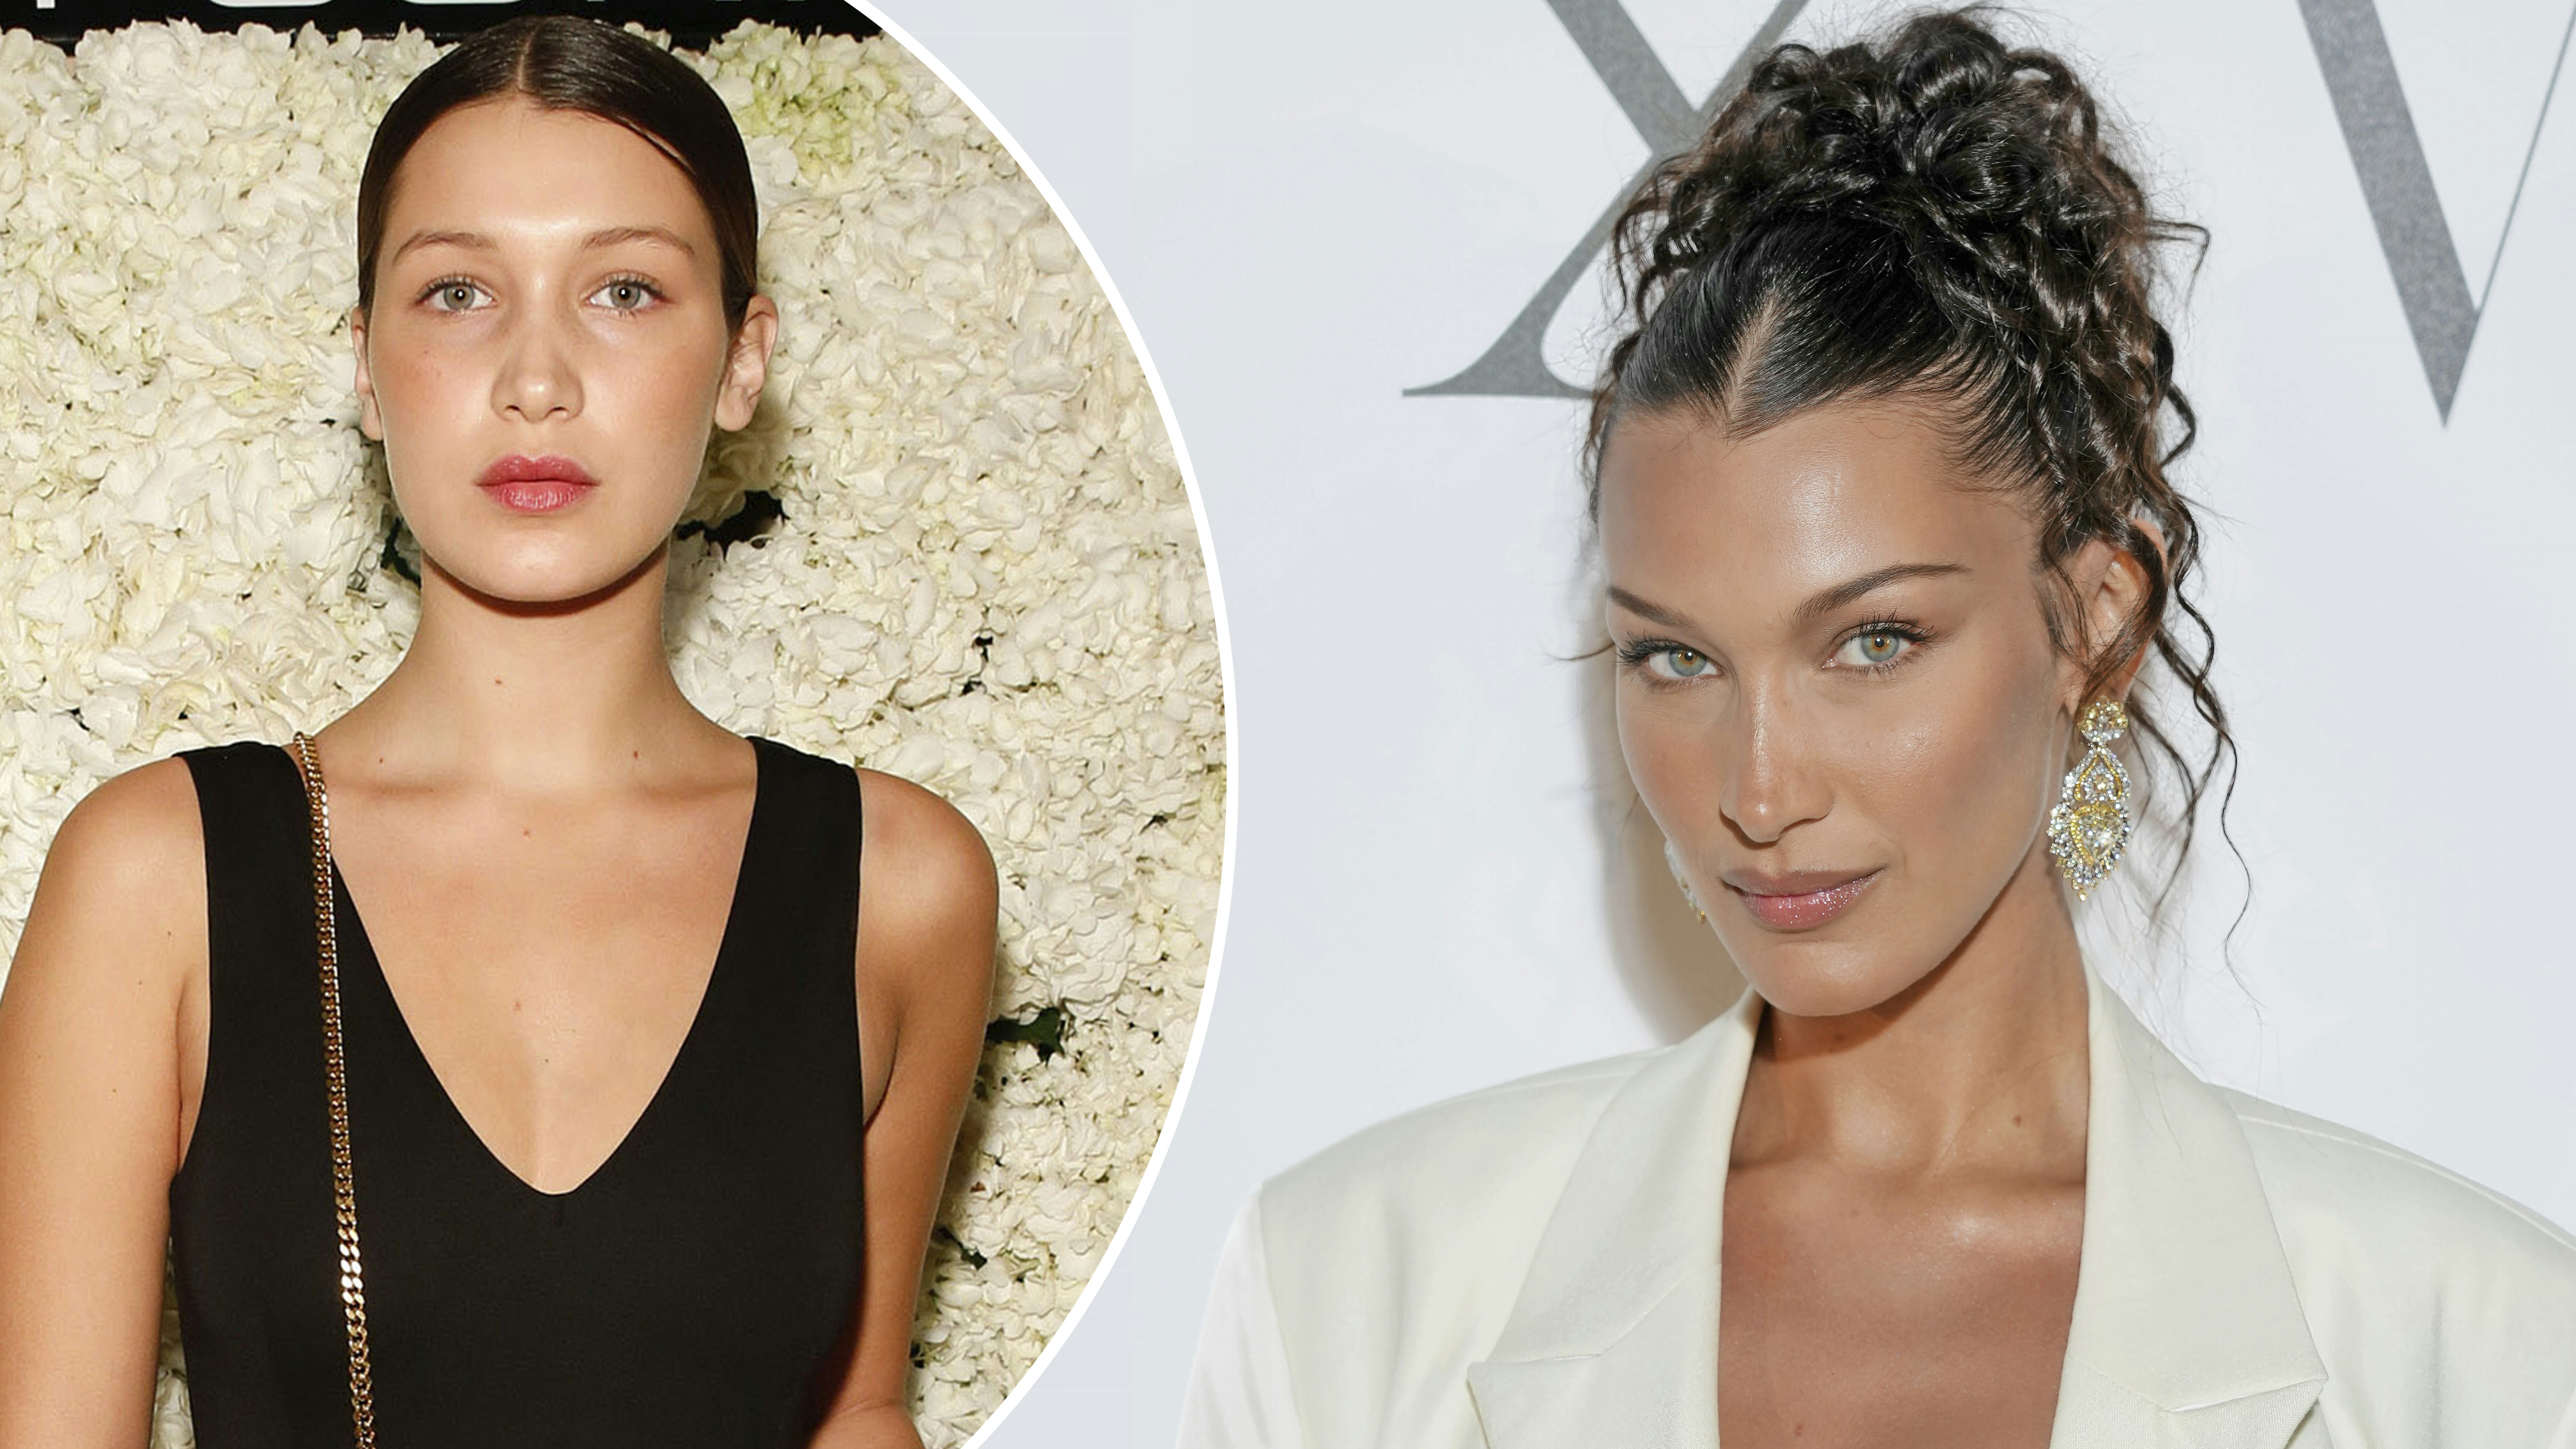 Bella Hadid Breaks Down 15 Looks From 2015 to Now, Life in Looks